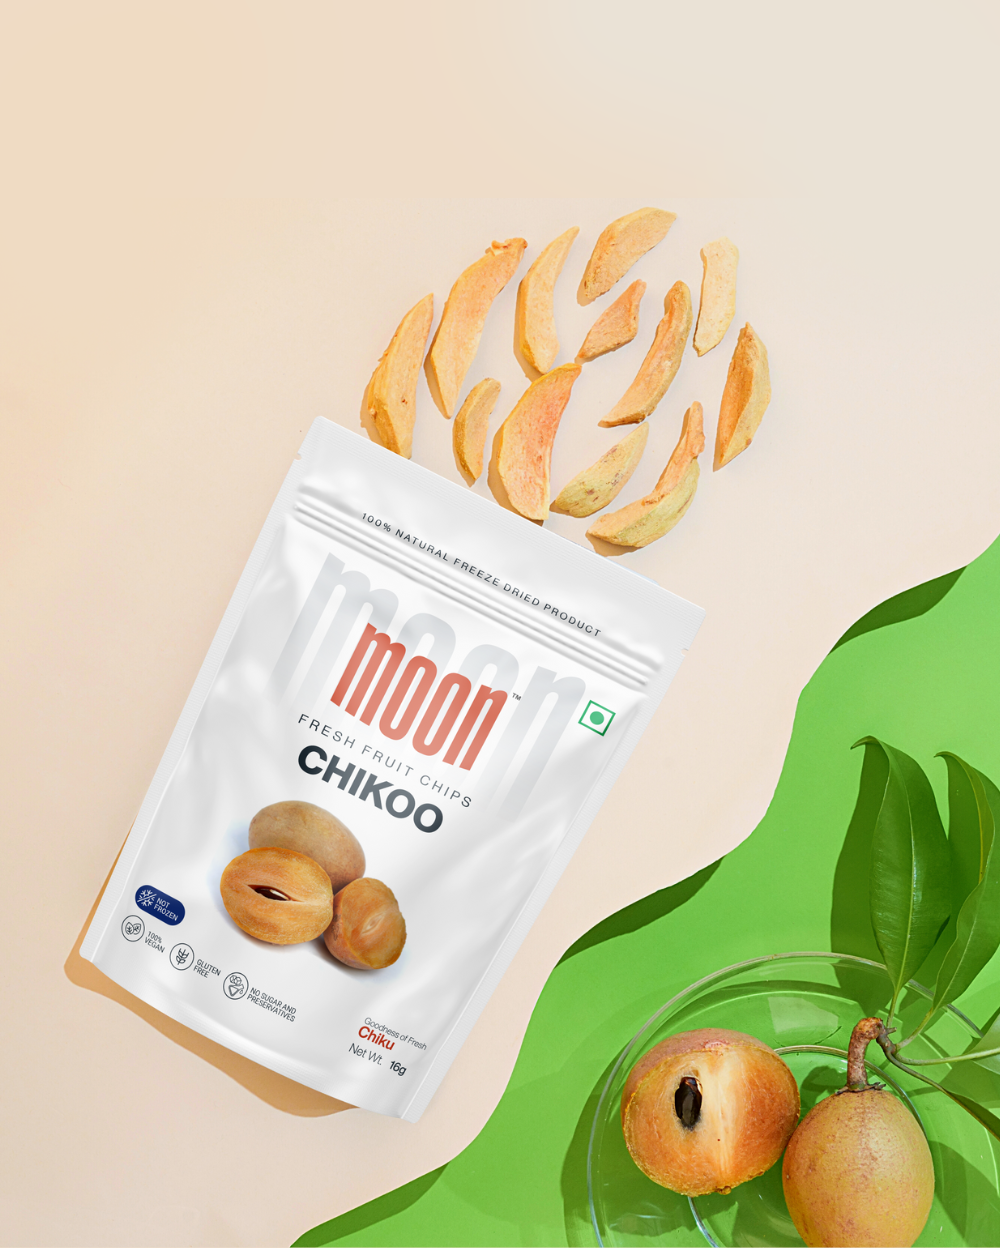 A package of Moon Freeze Dried Chikoo - Pack of 3 with a whole chikoo fruit and slices arranged around it, creating an inviting snack by MOONFREEZE FOODS PRIVATE LIMITED.